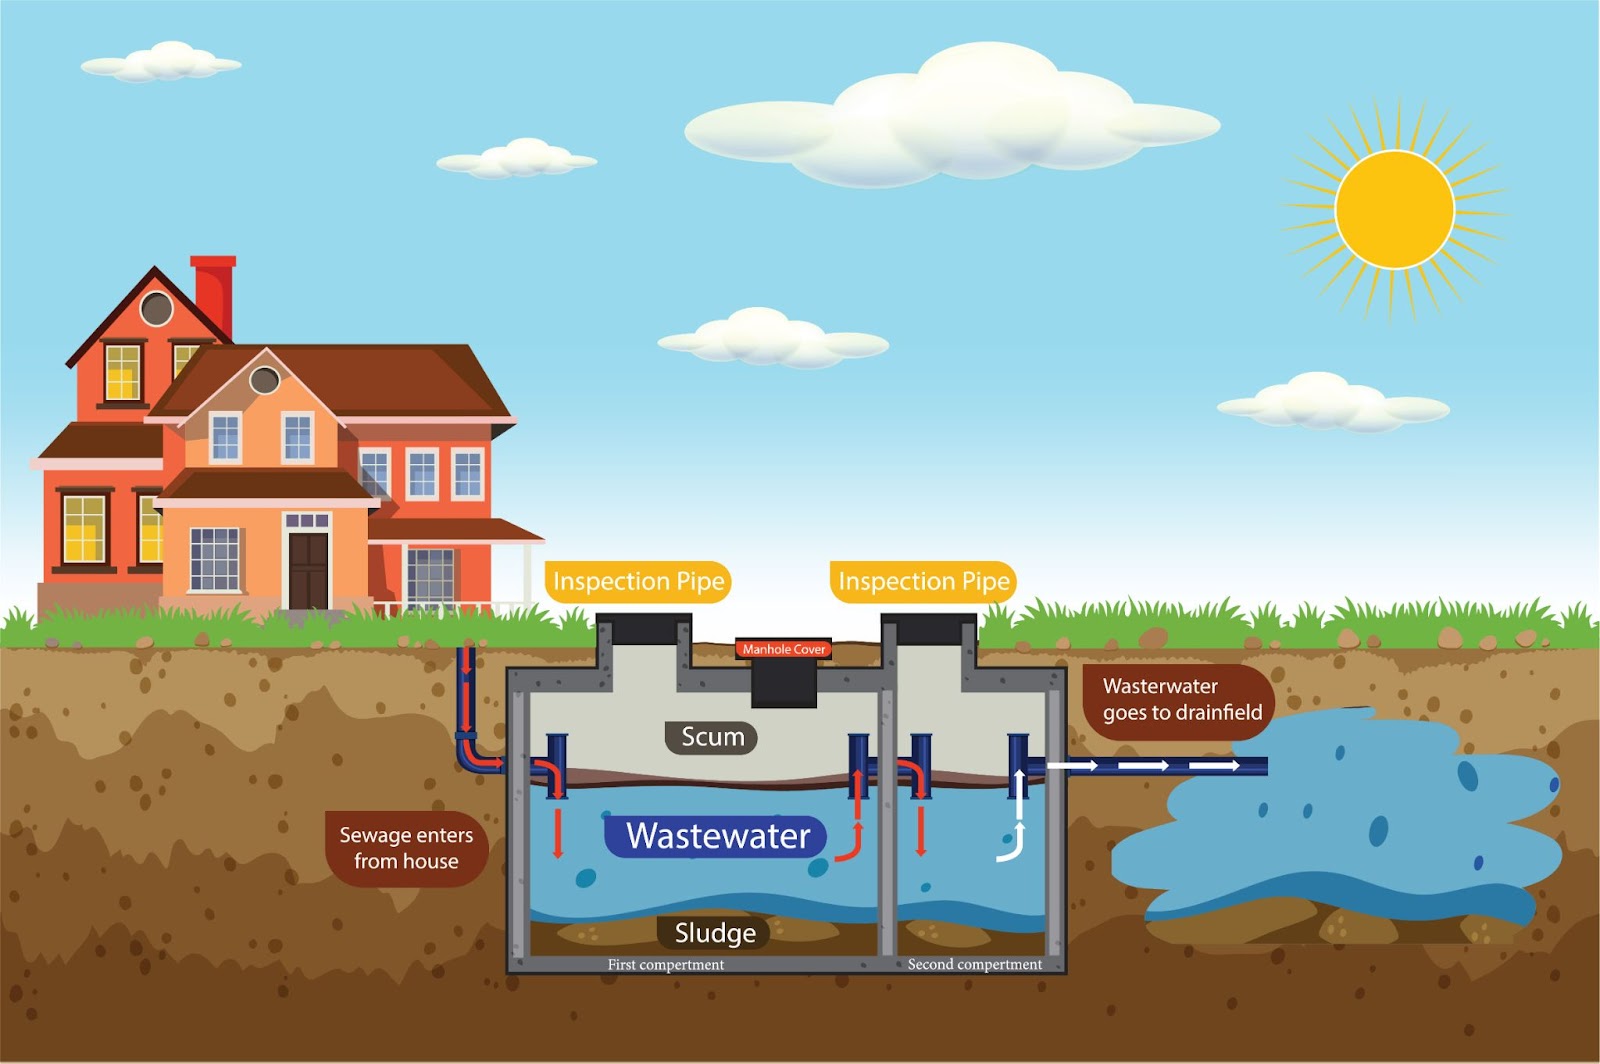 Diagram of water treatment system for sewage and water damage, covered by homeowners insurance